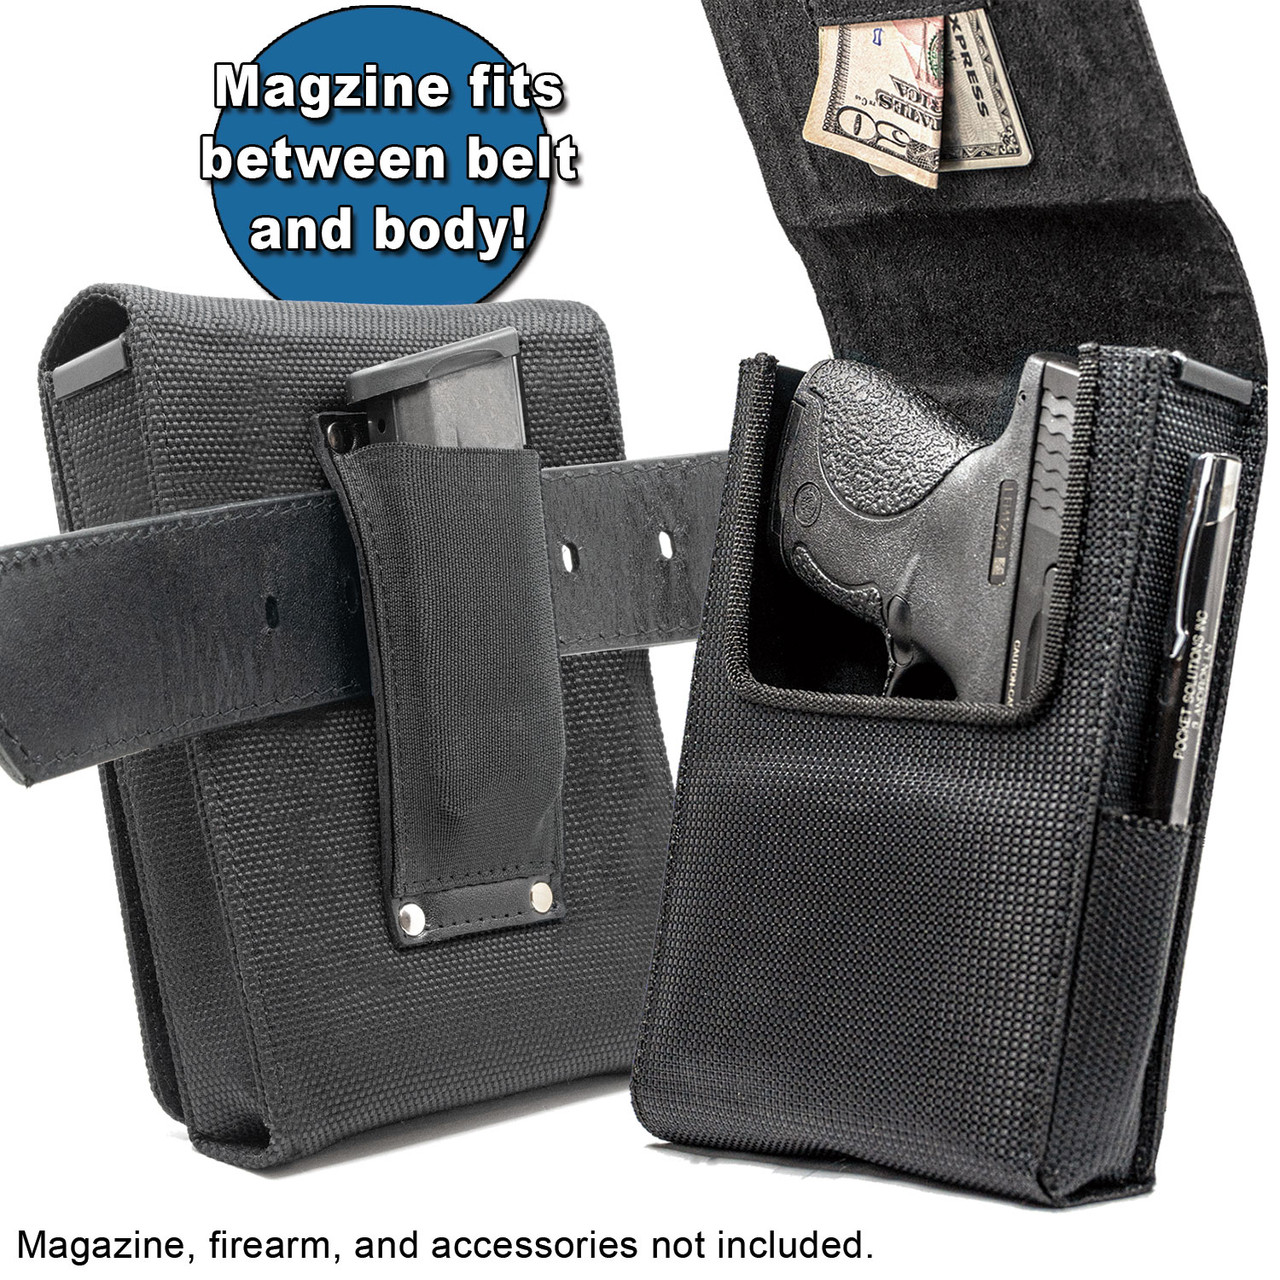 The Kahr PM40 Max Defense Holster